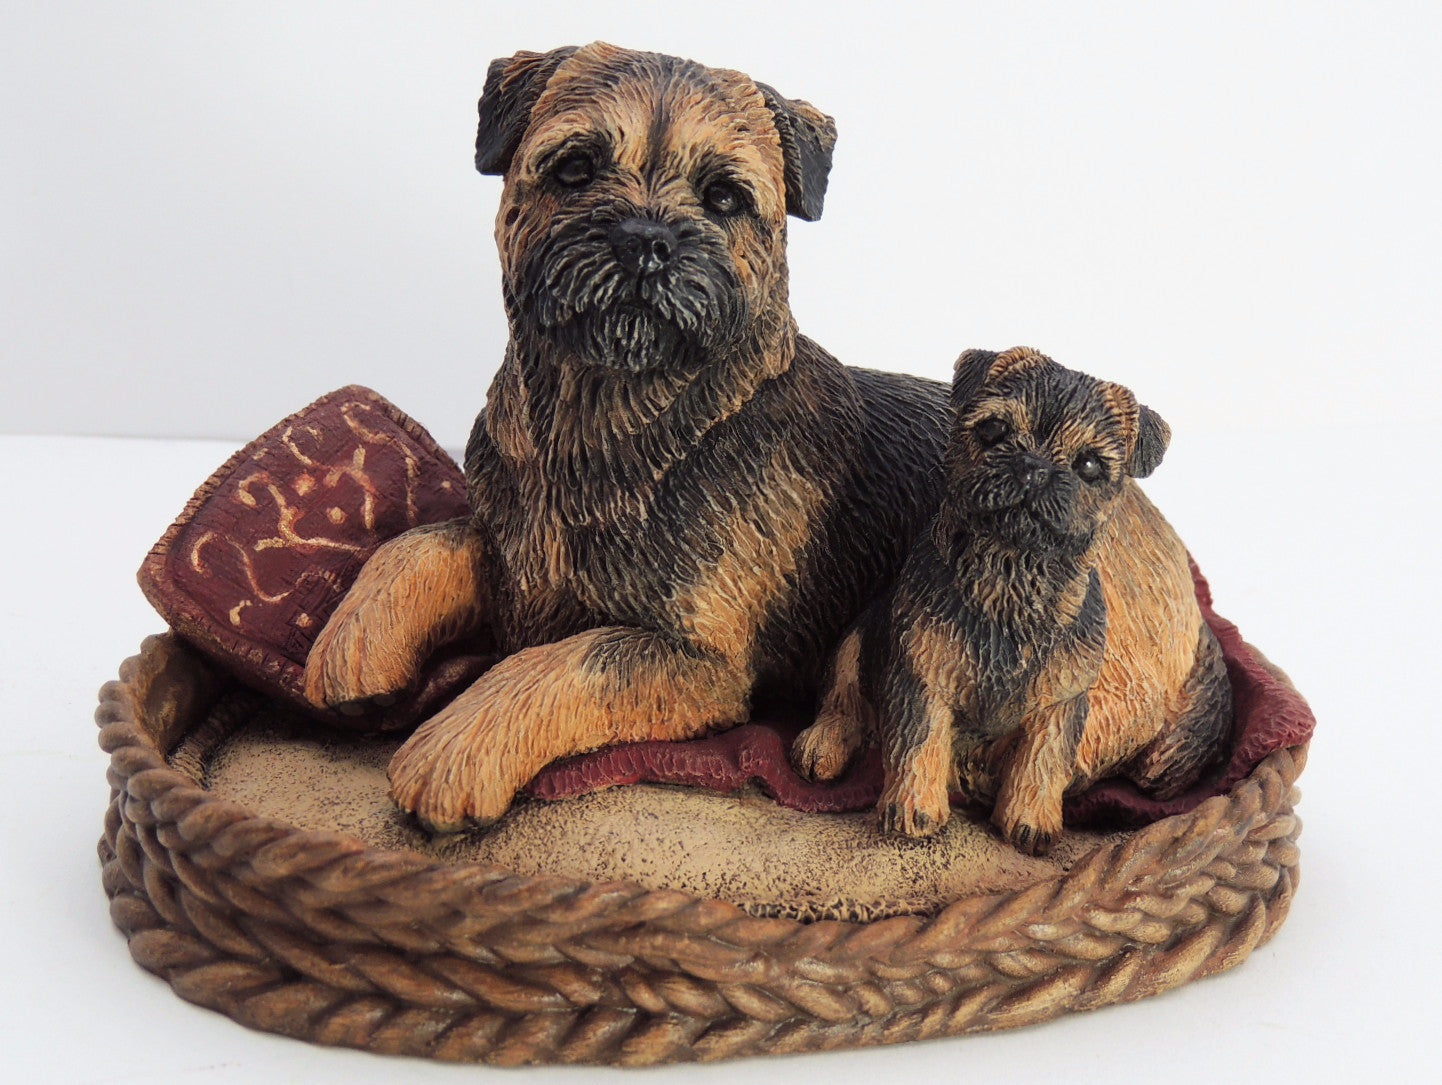 Sculpture of a red border terrier and puppy in a basket